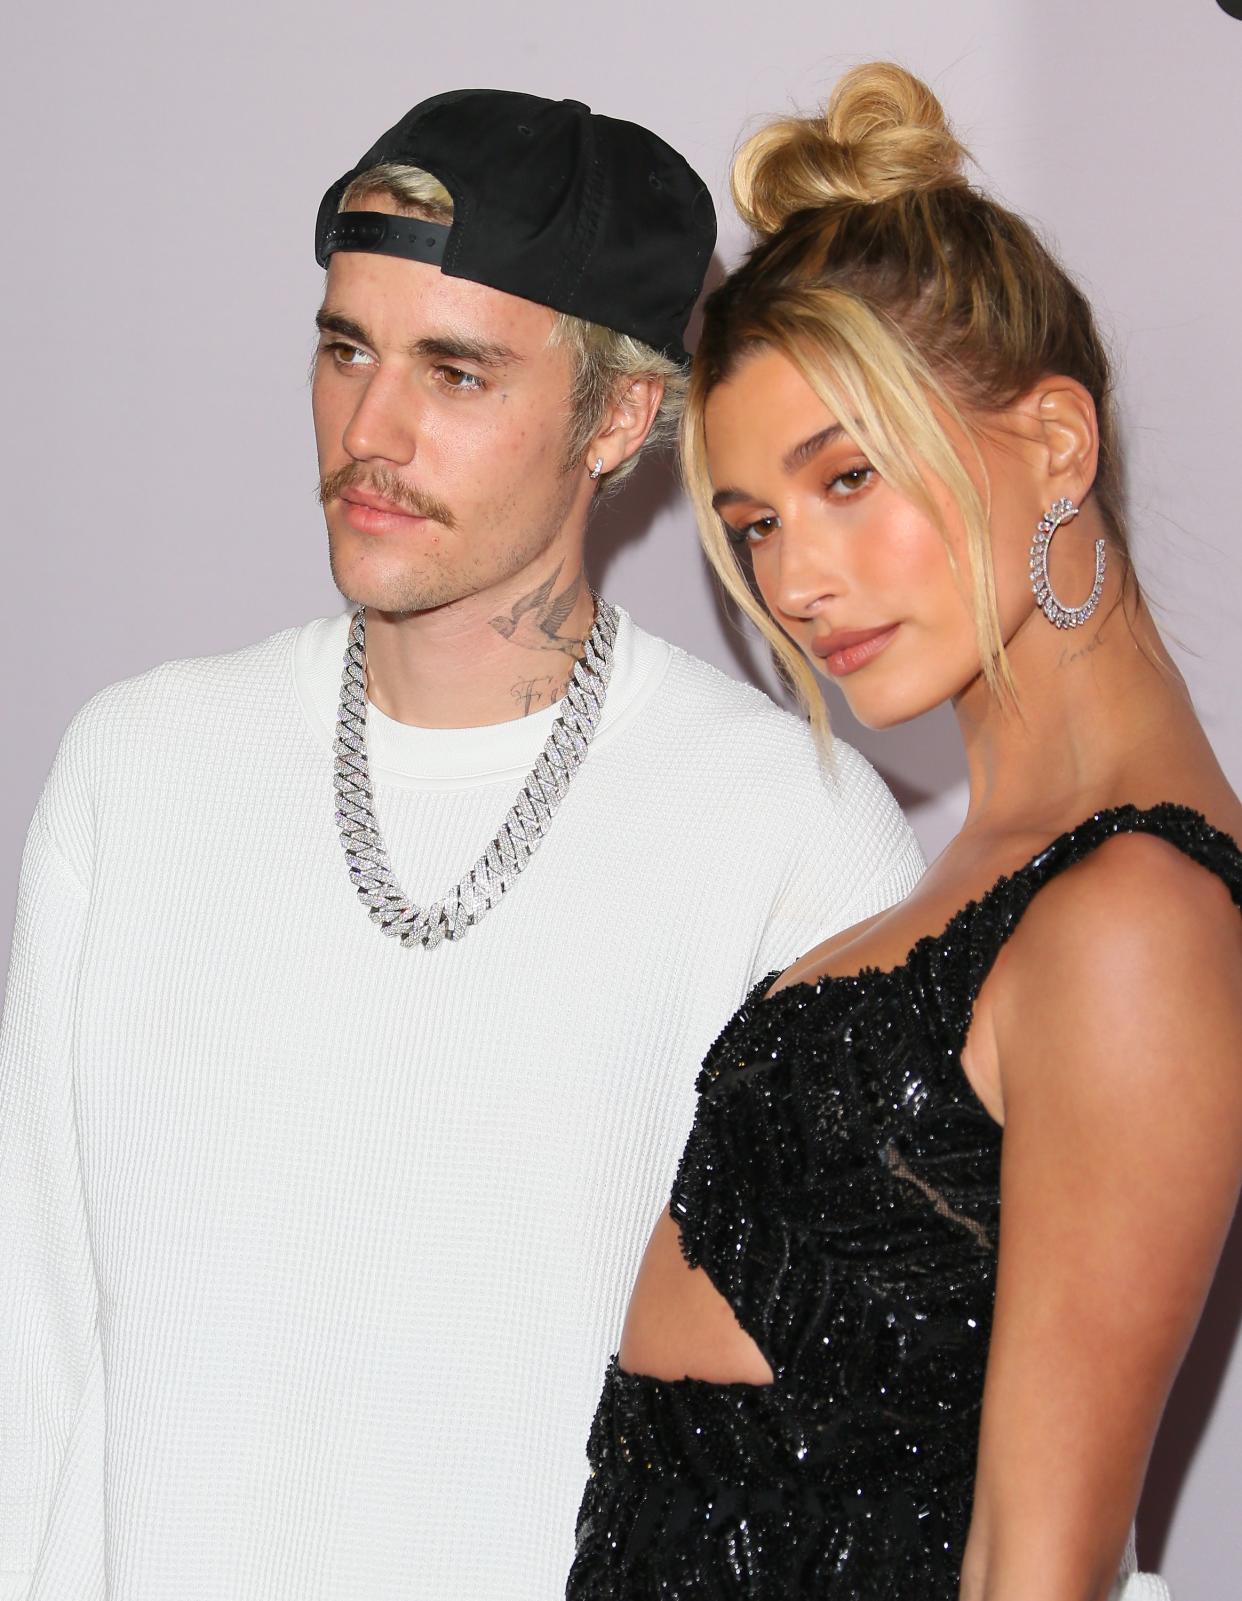 Justin Bieber has defended his wife from online attacks. (Photo: Jean Baptiste Lacroix/FilmMagic)